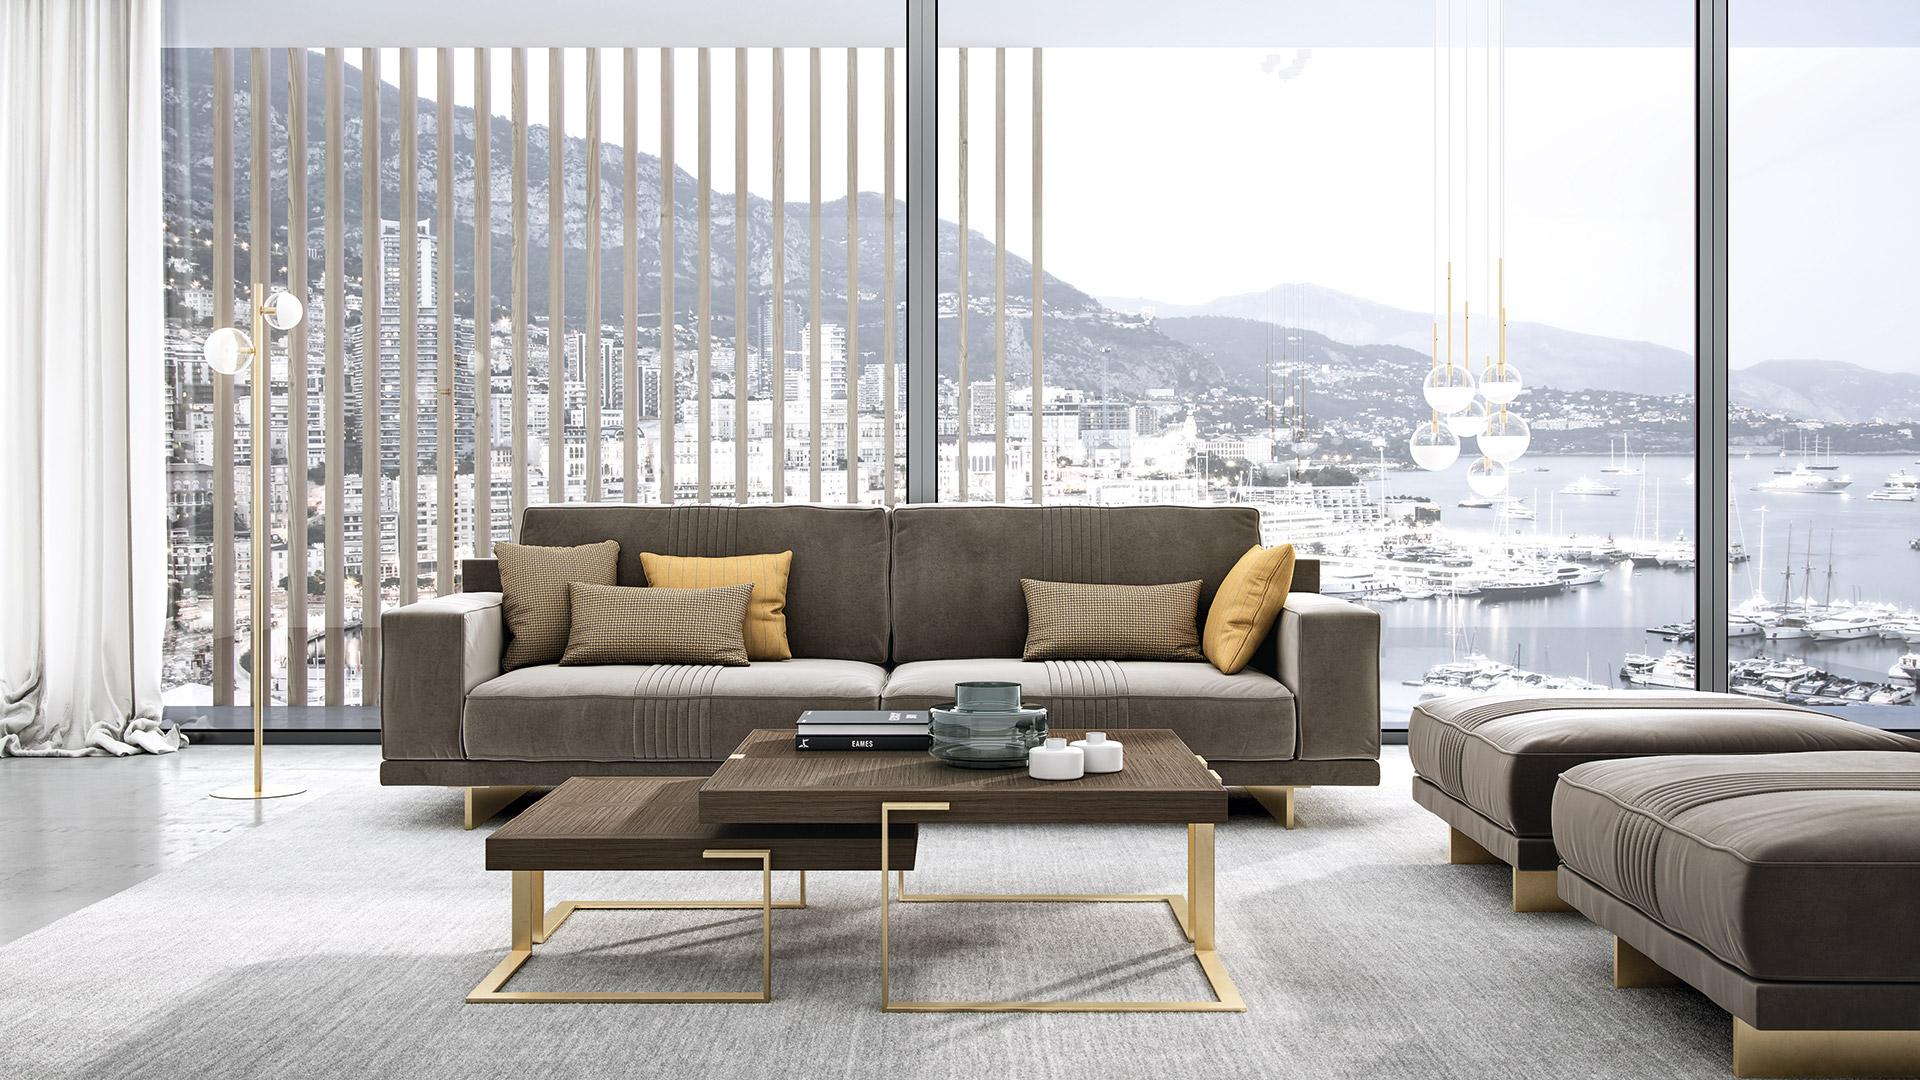 Two seater sofa characterized by a soft backrest perfectly shaped that enhances the comfort.
The metal base is in gold finishing and improves the modern look of the sofa.
On the back and on the seating complete the design thanks to pipeline